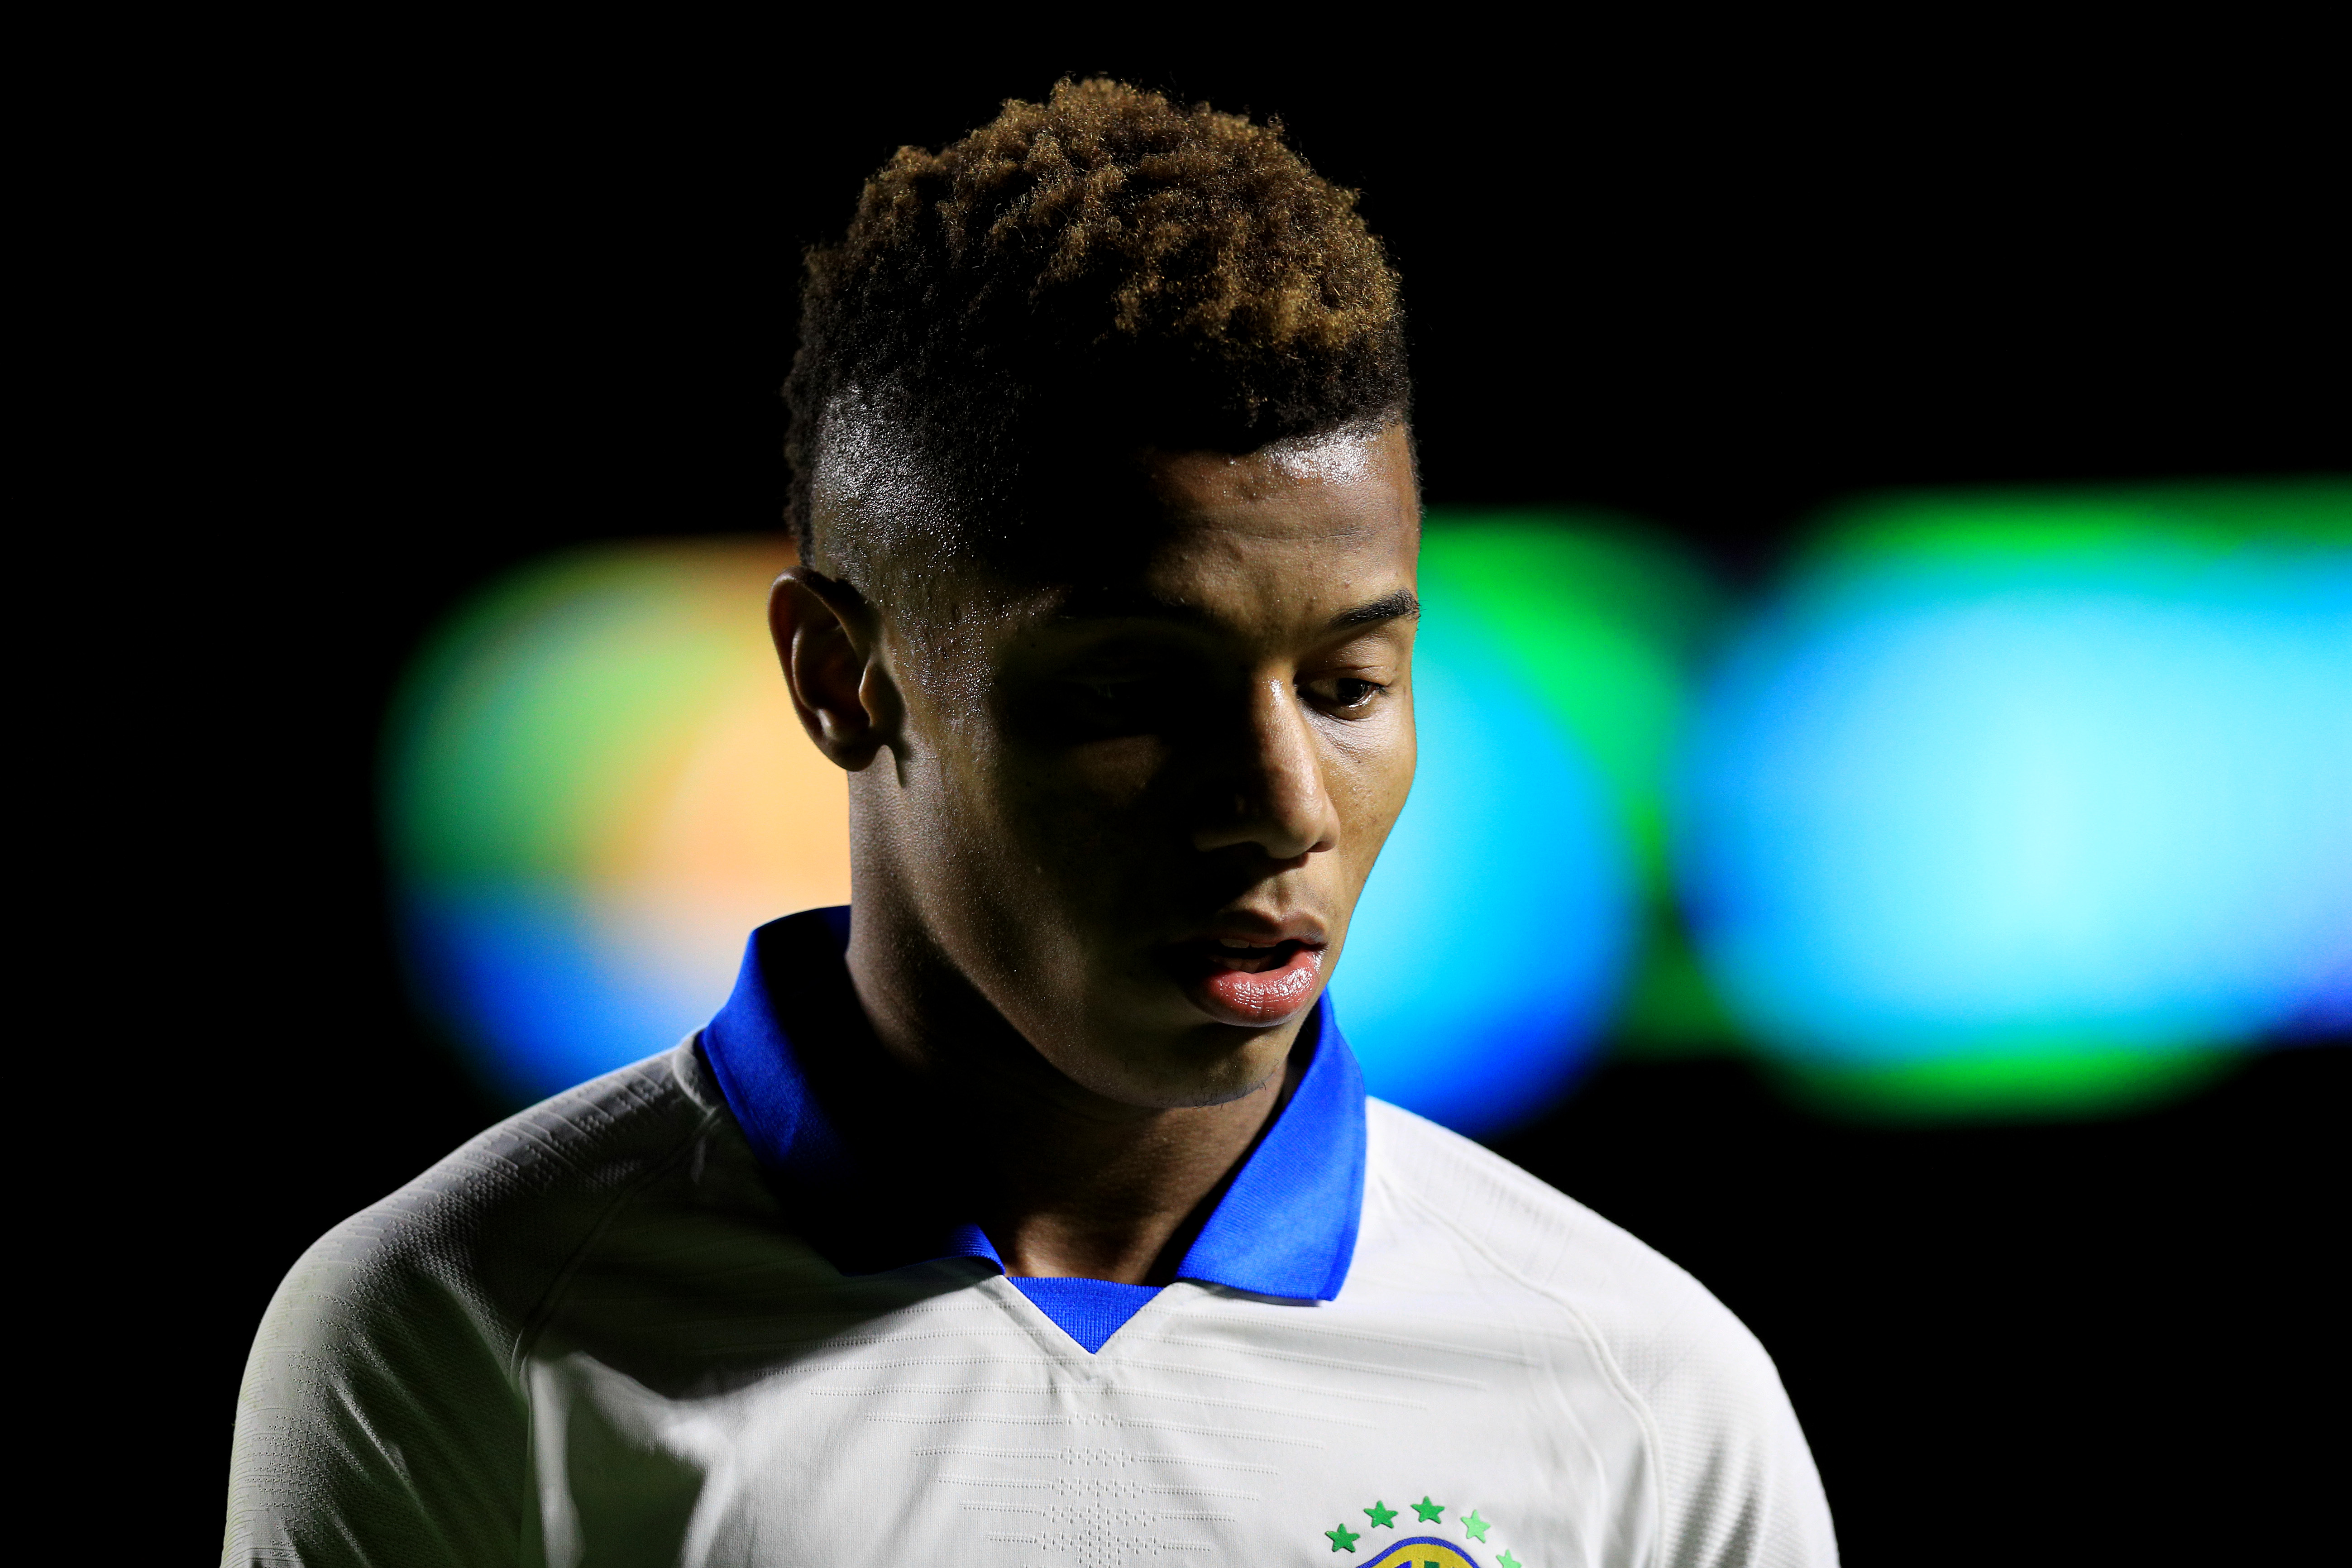 SAO PAULO, BRAZIL - JUNE 14: David Neres of Brazil looks on during the Copa America Brazil 2019 group A match between Brazil and Bolivia at Morumbi Stadium on June 14, 2019 in Sao Paulo, Brazil. (Photo by Buda Mendes/Getty Images)